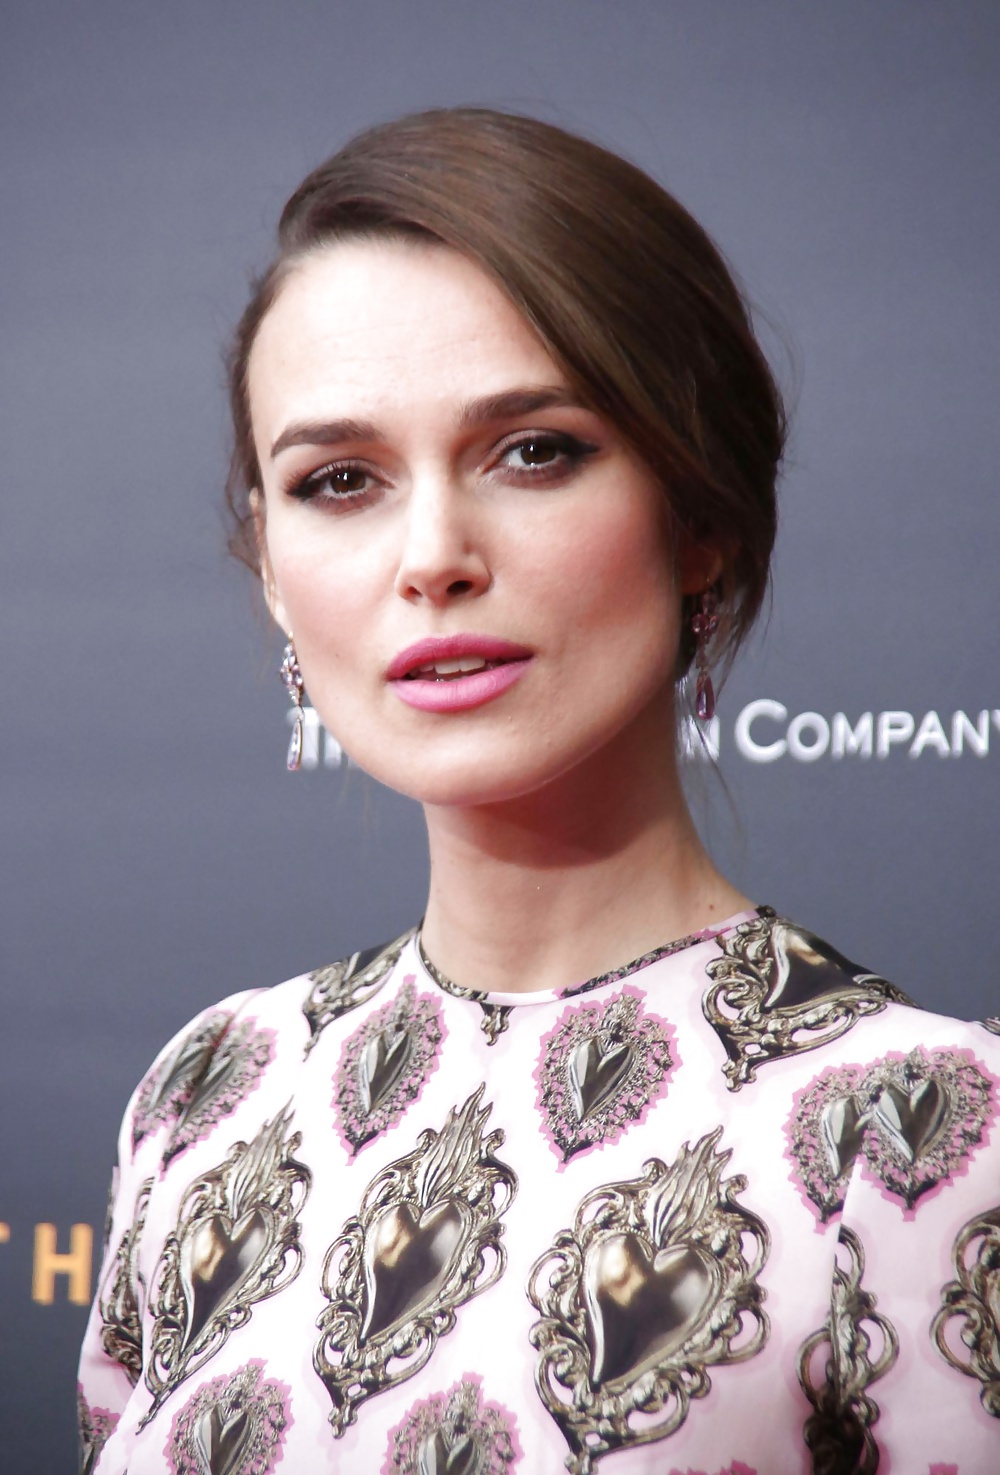 Keira Knightley The Royal Lady of England #35649303